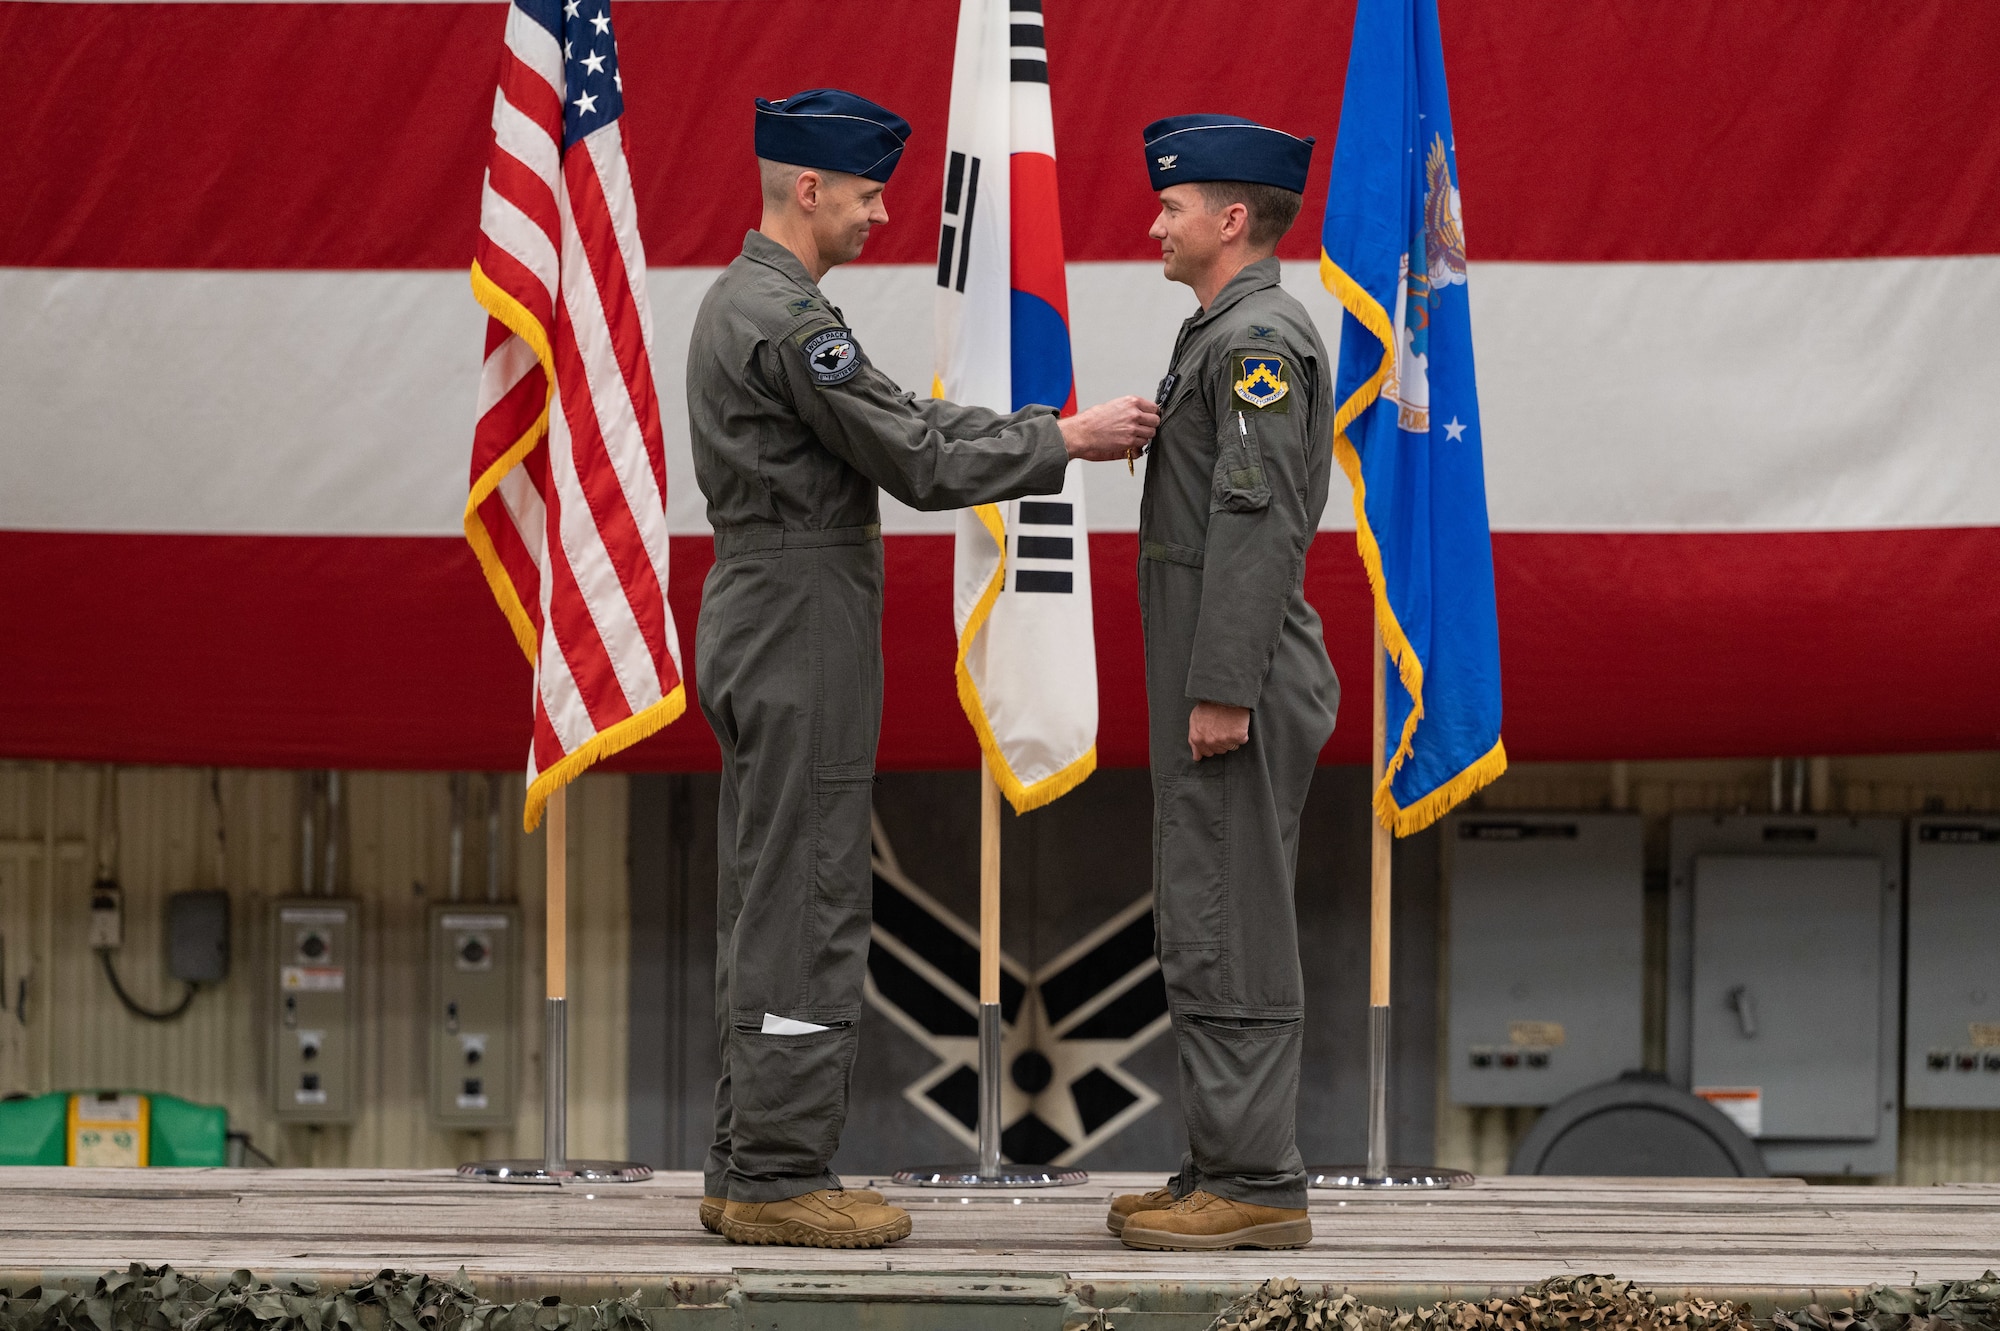 Col. Timothy B. Murphy, left, 8th Fighter Wing commander, pins a medal on Col. Matthew Belle, 8th Operations Group outgoing commander, during a change of command ceremony at Kunsan Air Base, Republic of Korea, June 2, 2023. The 8th OG commander is responsible for conventional air-to-ground and air-to-air missions in support of armistice and wartime taskings to defend the Republic of Korea. (U.S. Air Force photo by Staff Sgt. Sadie Colbert)